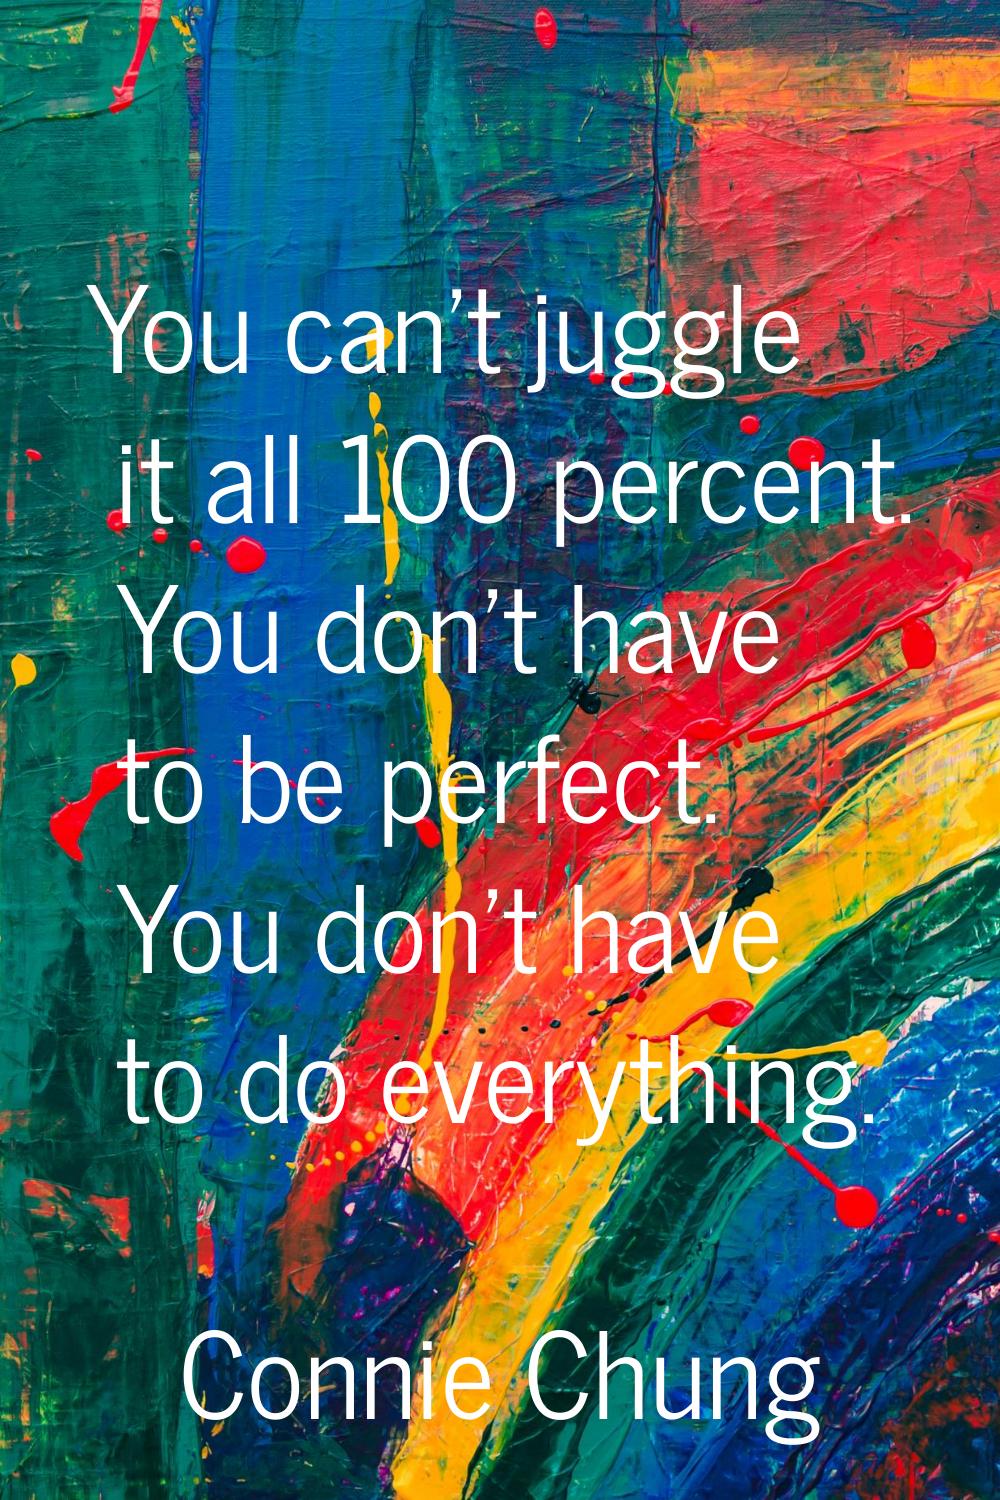 You can't juggle it all 100 percent. You don't have to be perfect. You don't have to do everything.